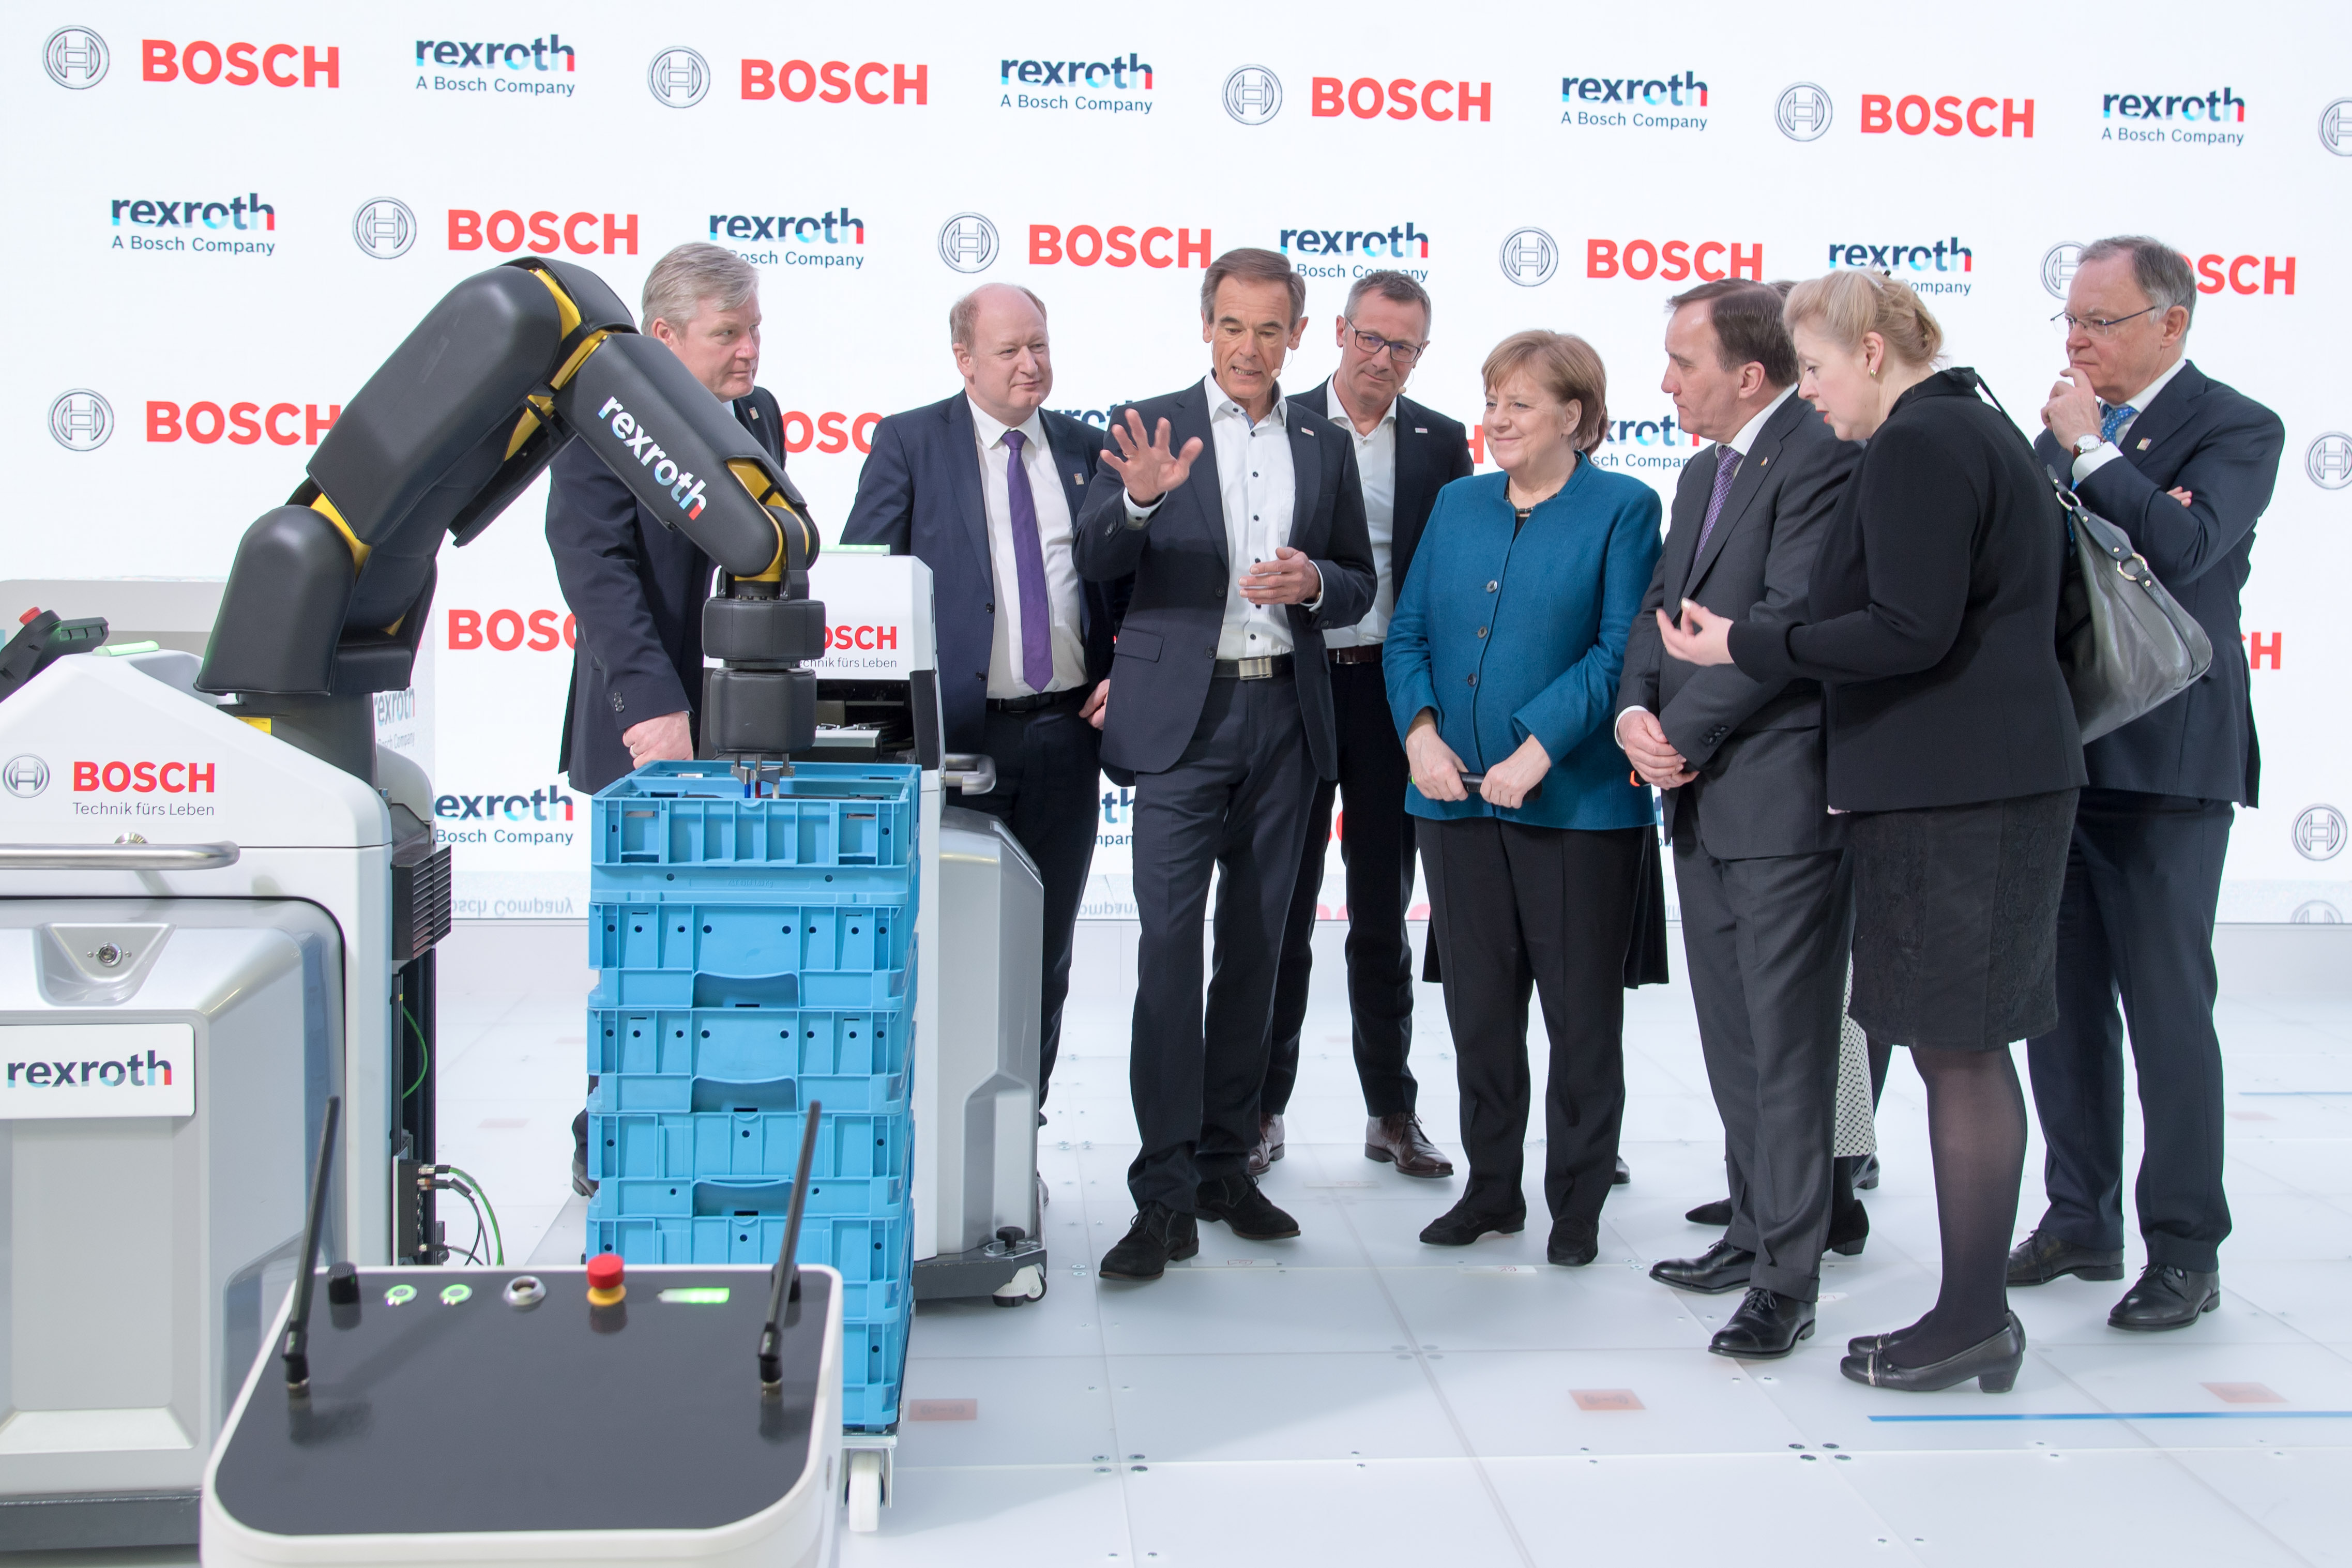 Chancellor Angela Merkel and the swedish prime minister Stefan Löfven visit the Bosch booth at the Hannover Messe 2019. The focus is on autonomous transport systems and intelligent robotics